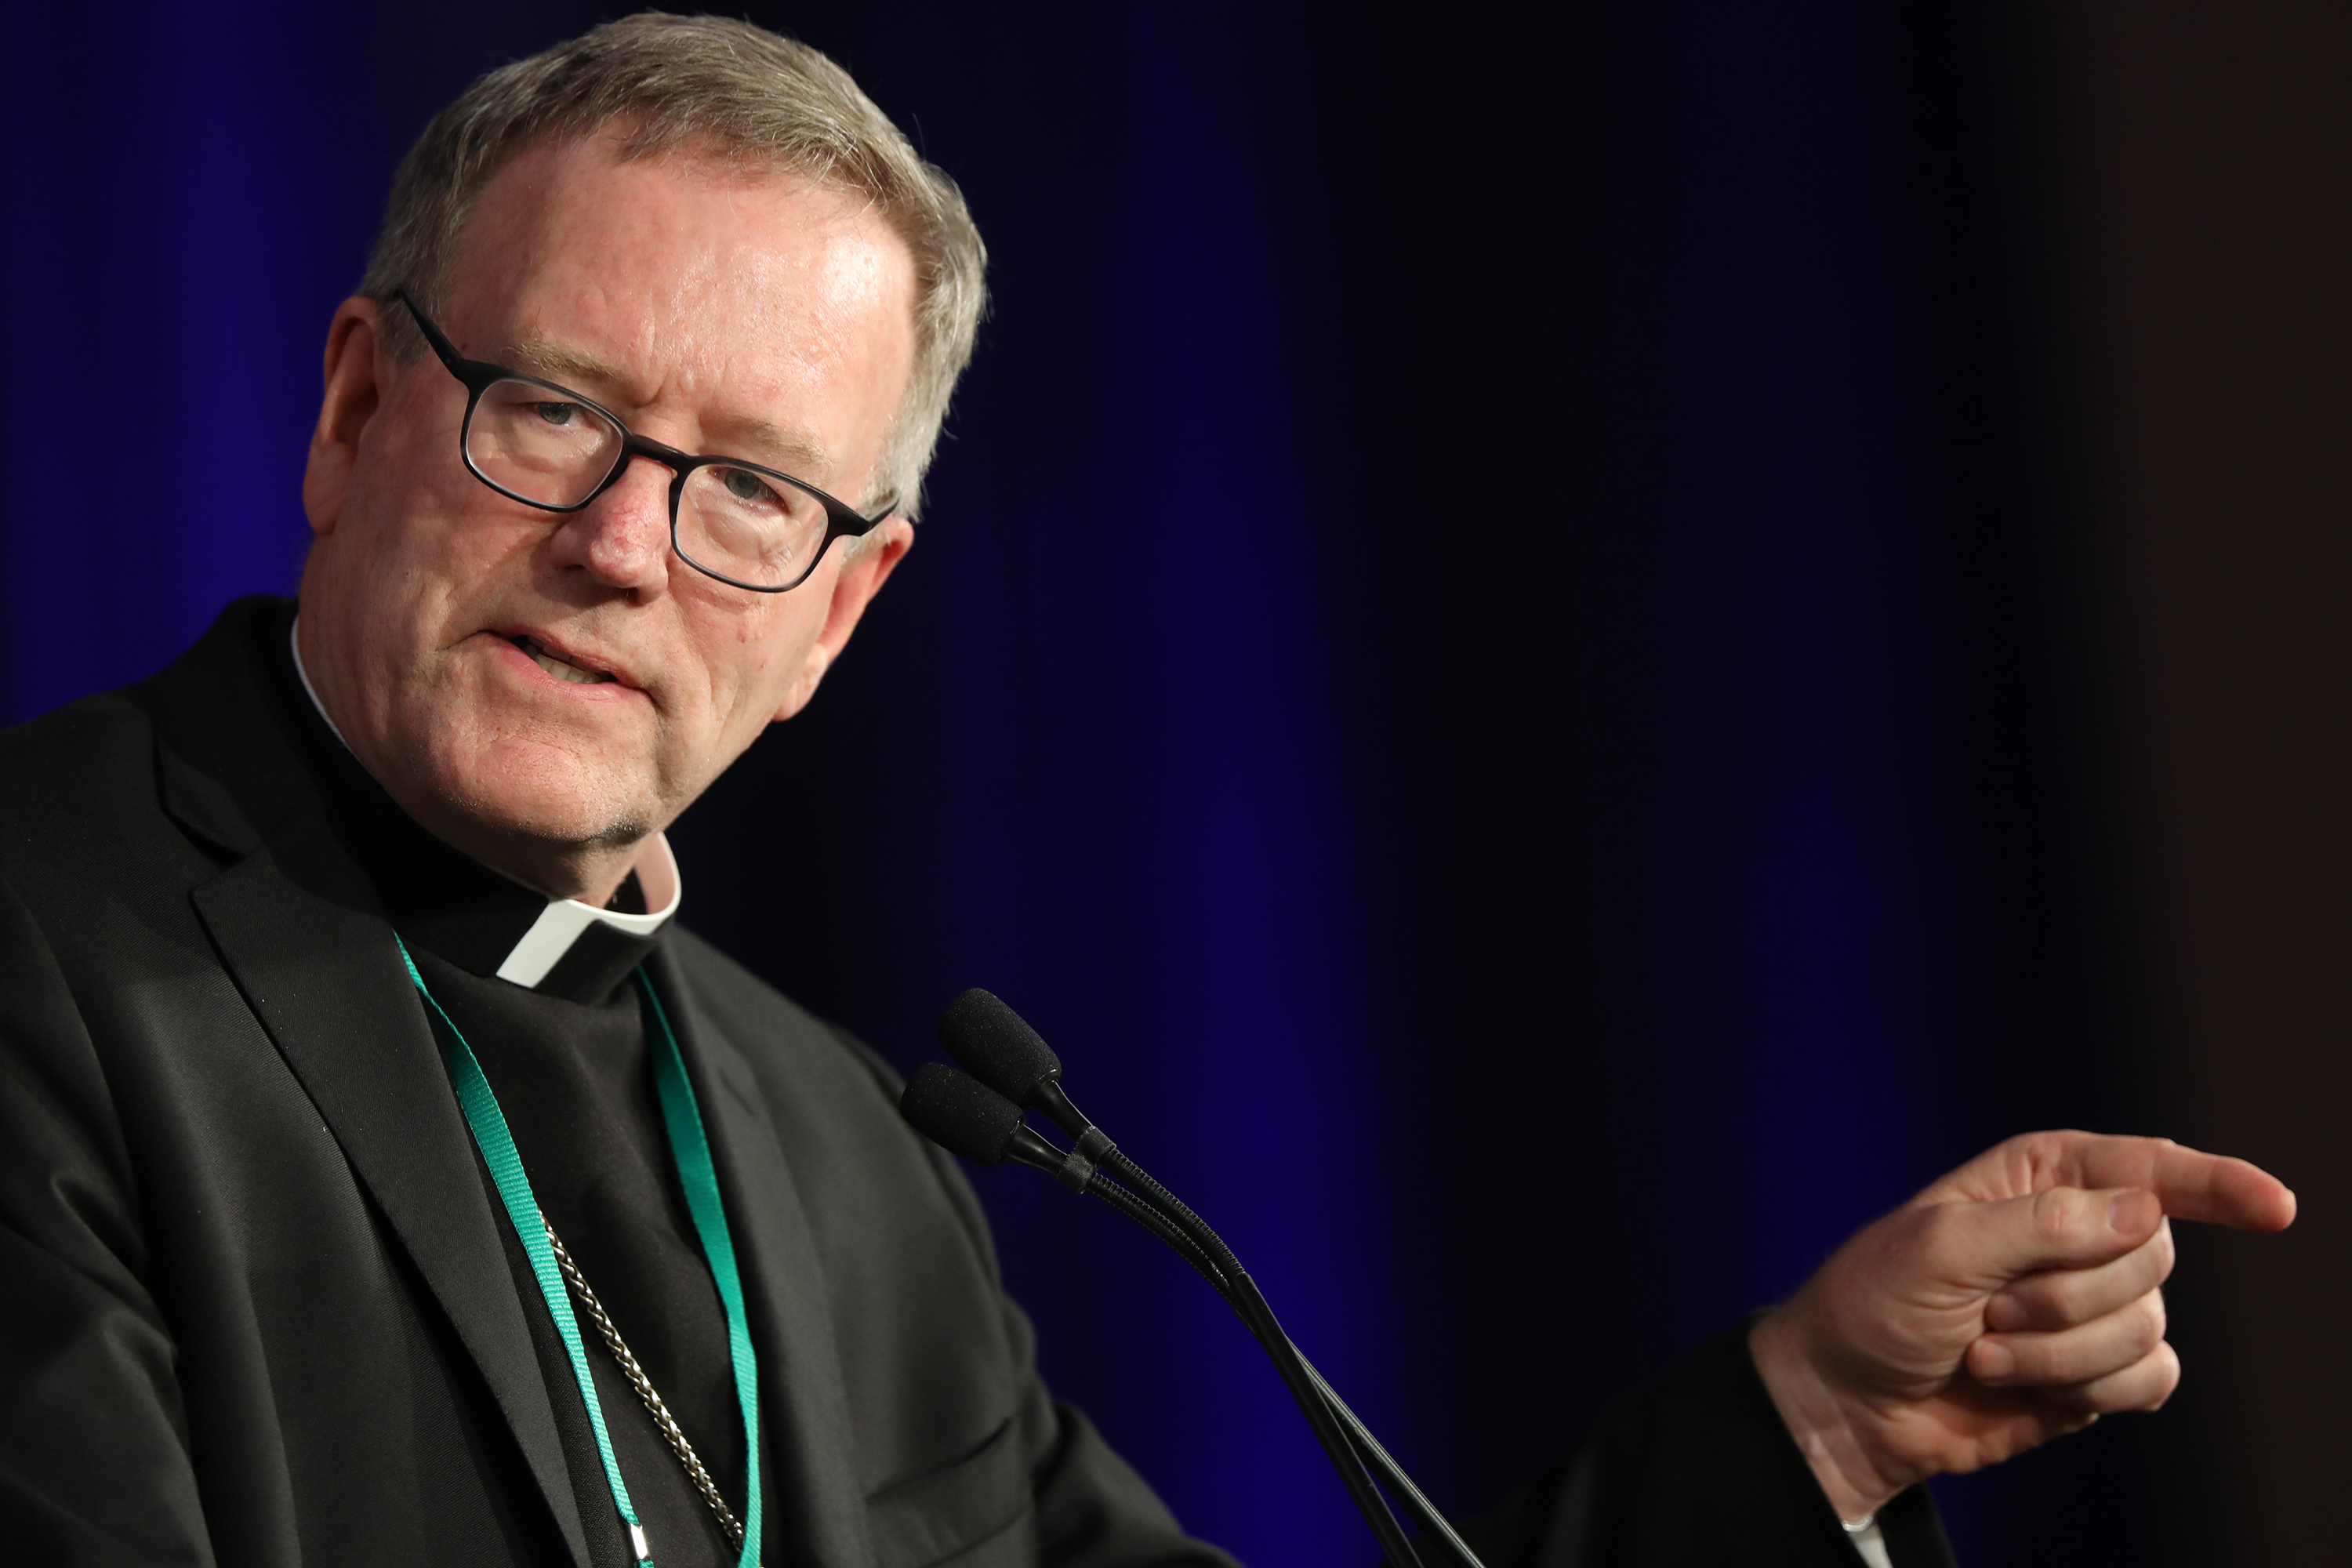 Church should focus on getting 'nones' back, Bishop Barron says